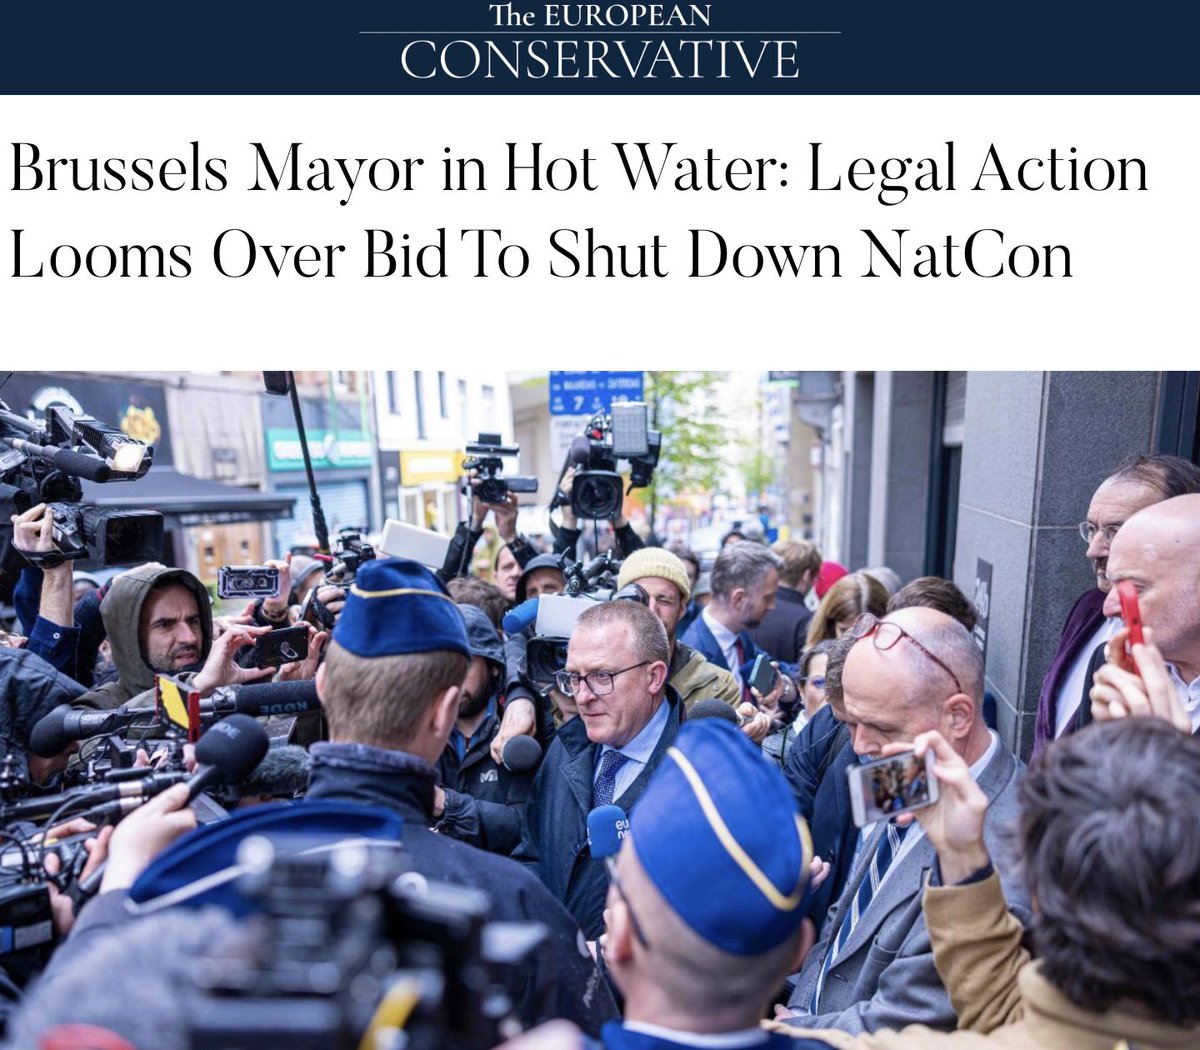 Finally… some good news coming out of Brussels. The radical Left mayor of Brussels who attempted to shut down and censor NatCon just a few weeks ago is facing legal action for attempting to infringe on the right of citizens to free speech.